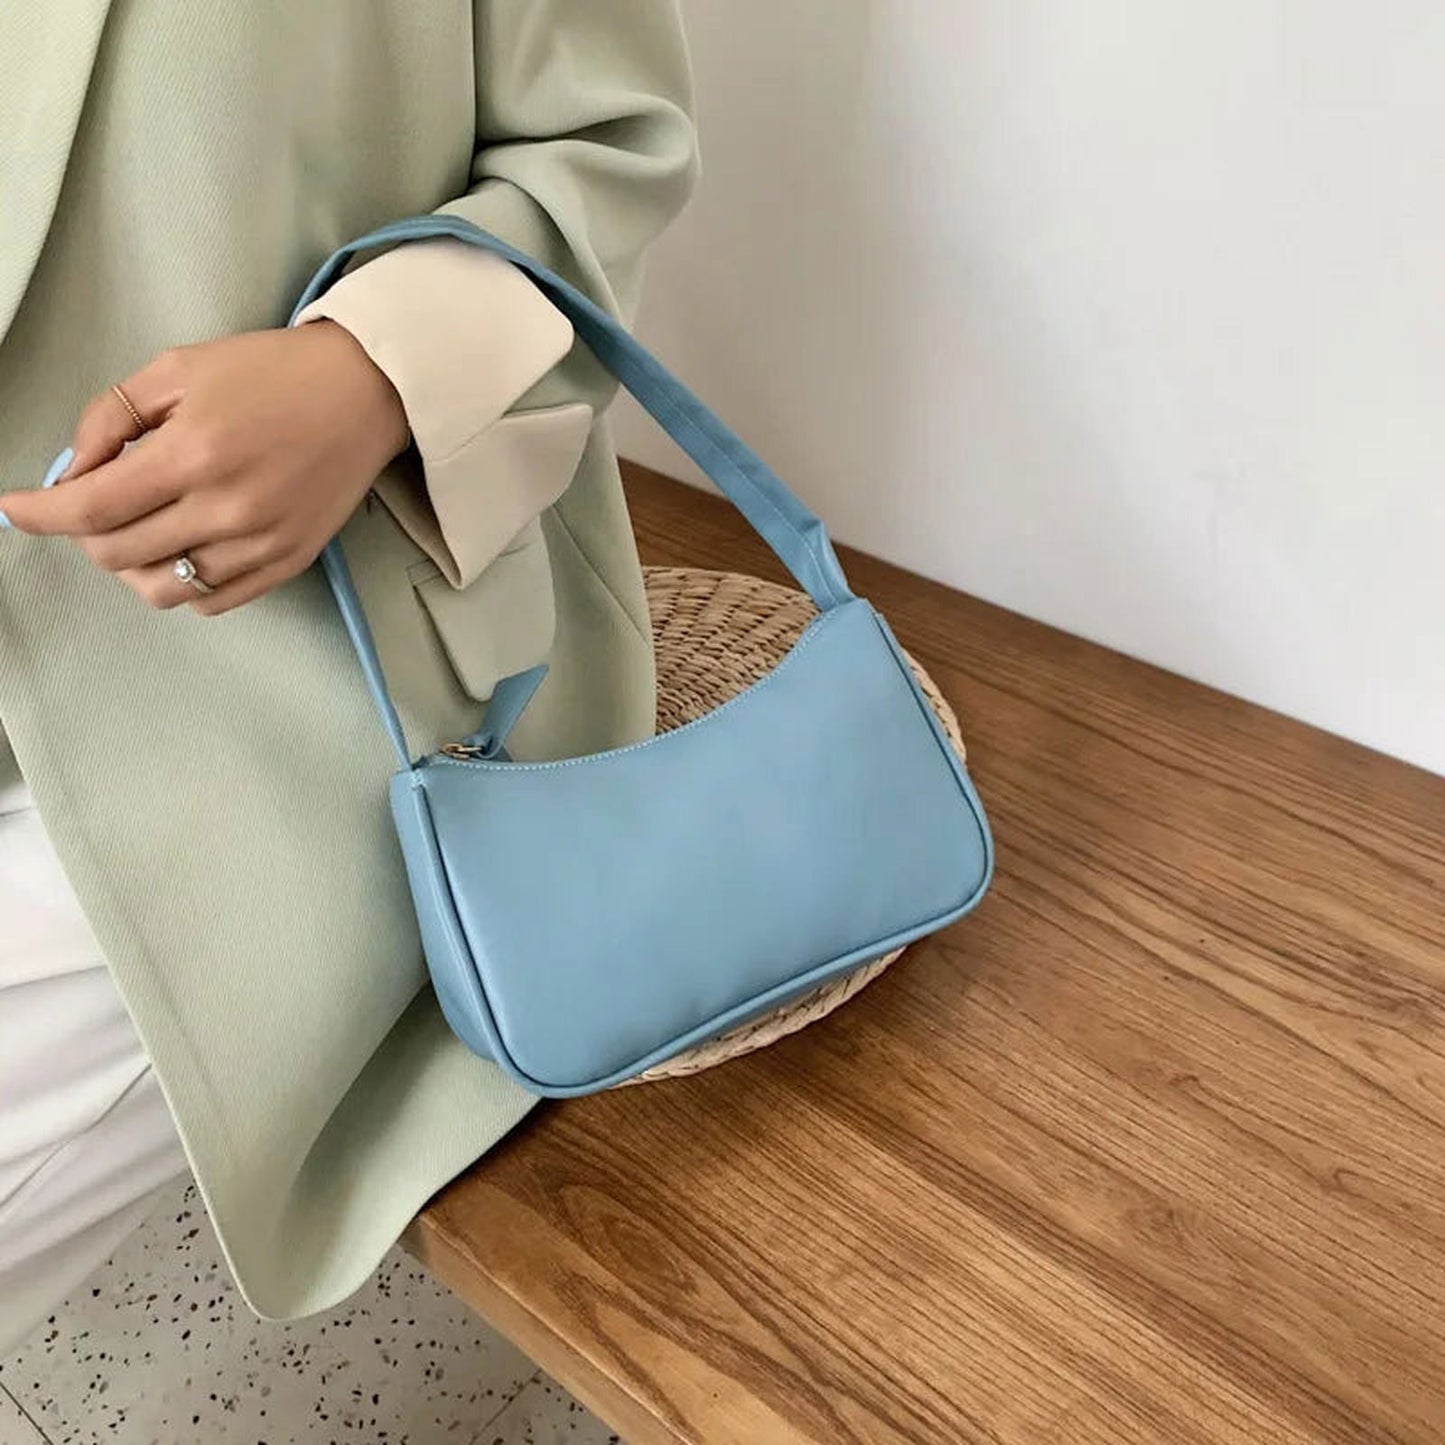 Totes Bags for Women New Trendy Vintage Handbag Female Small Subaxillary Bags Casual Mini Shoulder Bag - ARCHE